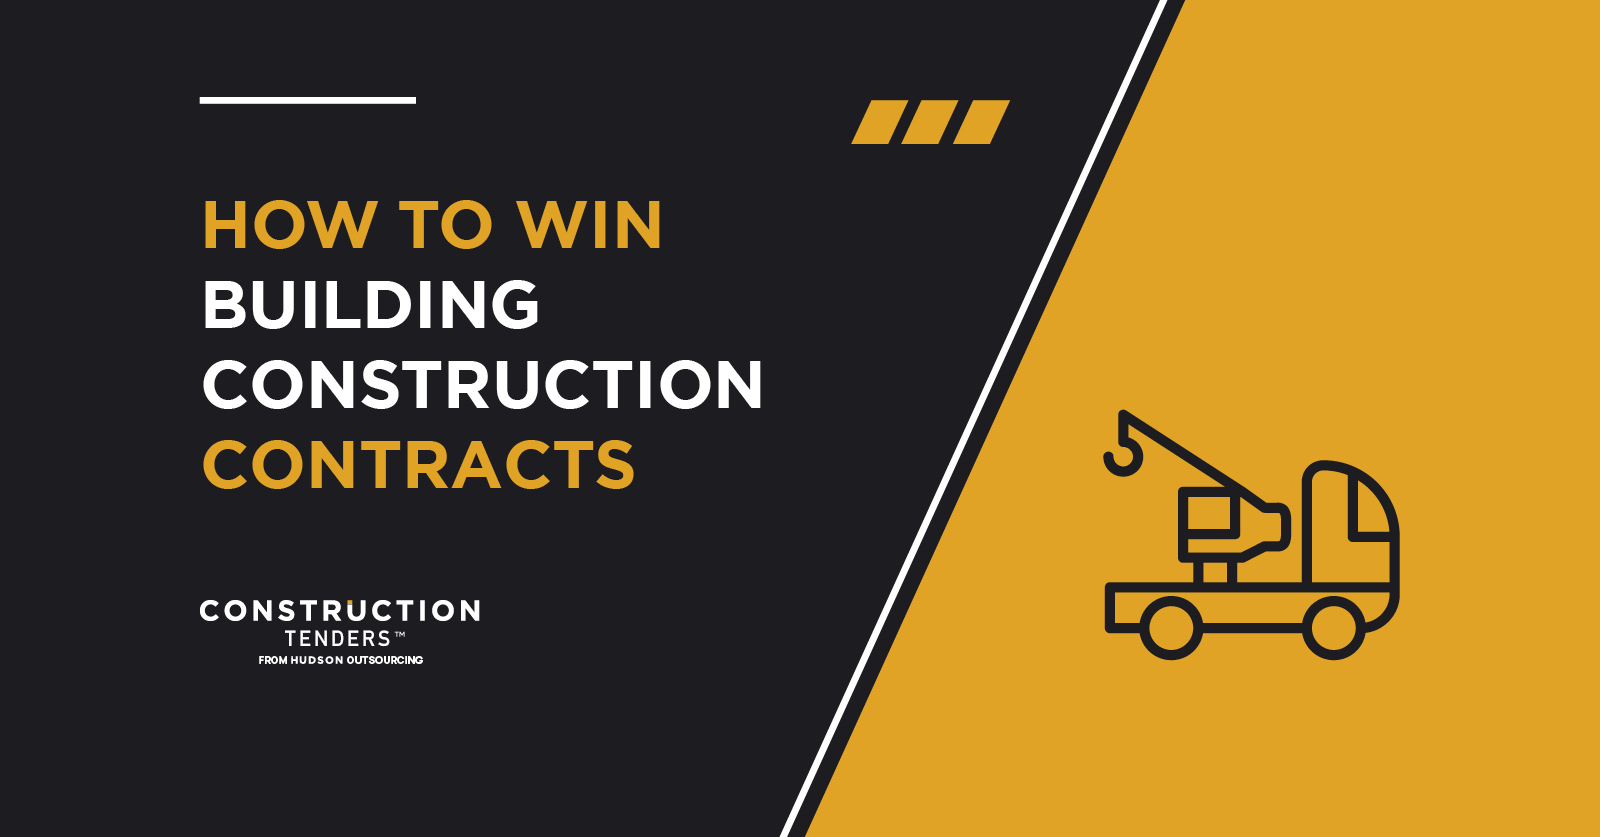 Building Construction Contracts for Tender | Win Construction Tenders